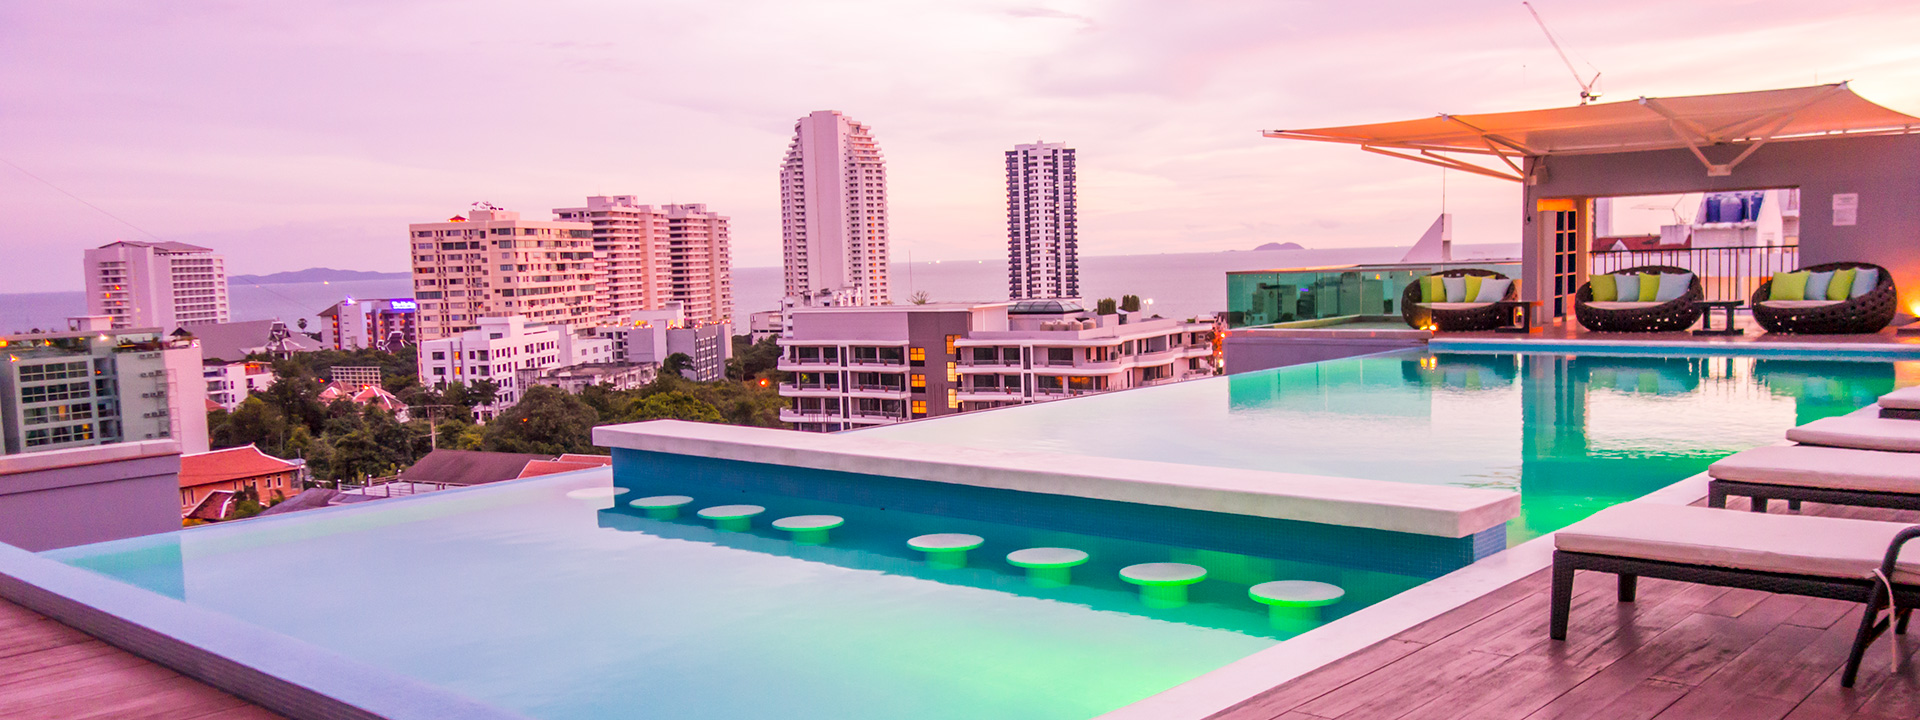 Cherish the Stunning Sunsets at the Infinity Swimming Pool on rooftop in Pratamnak mountain hotels overlooking the Jomtien and Pratamnak Bay.